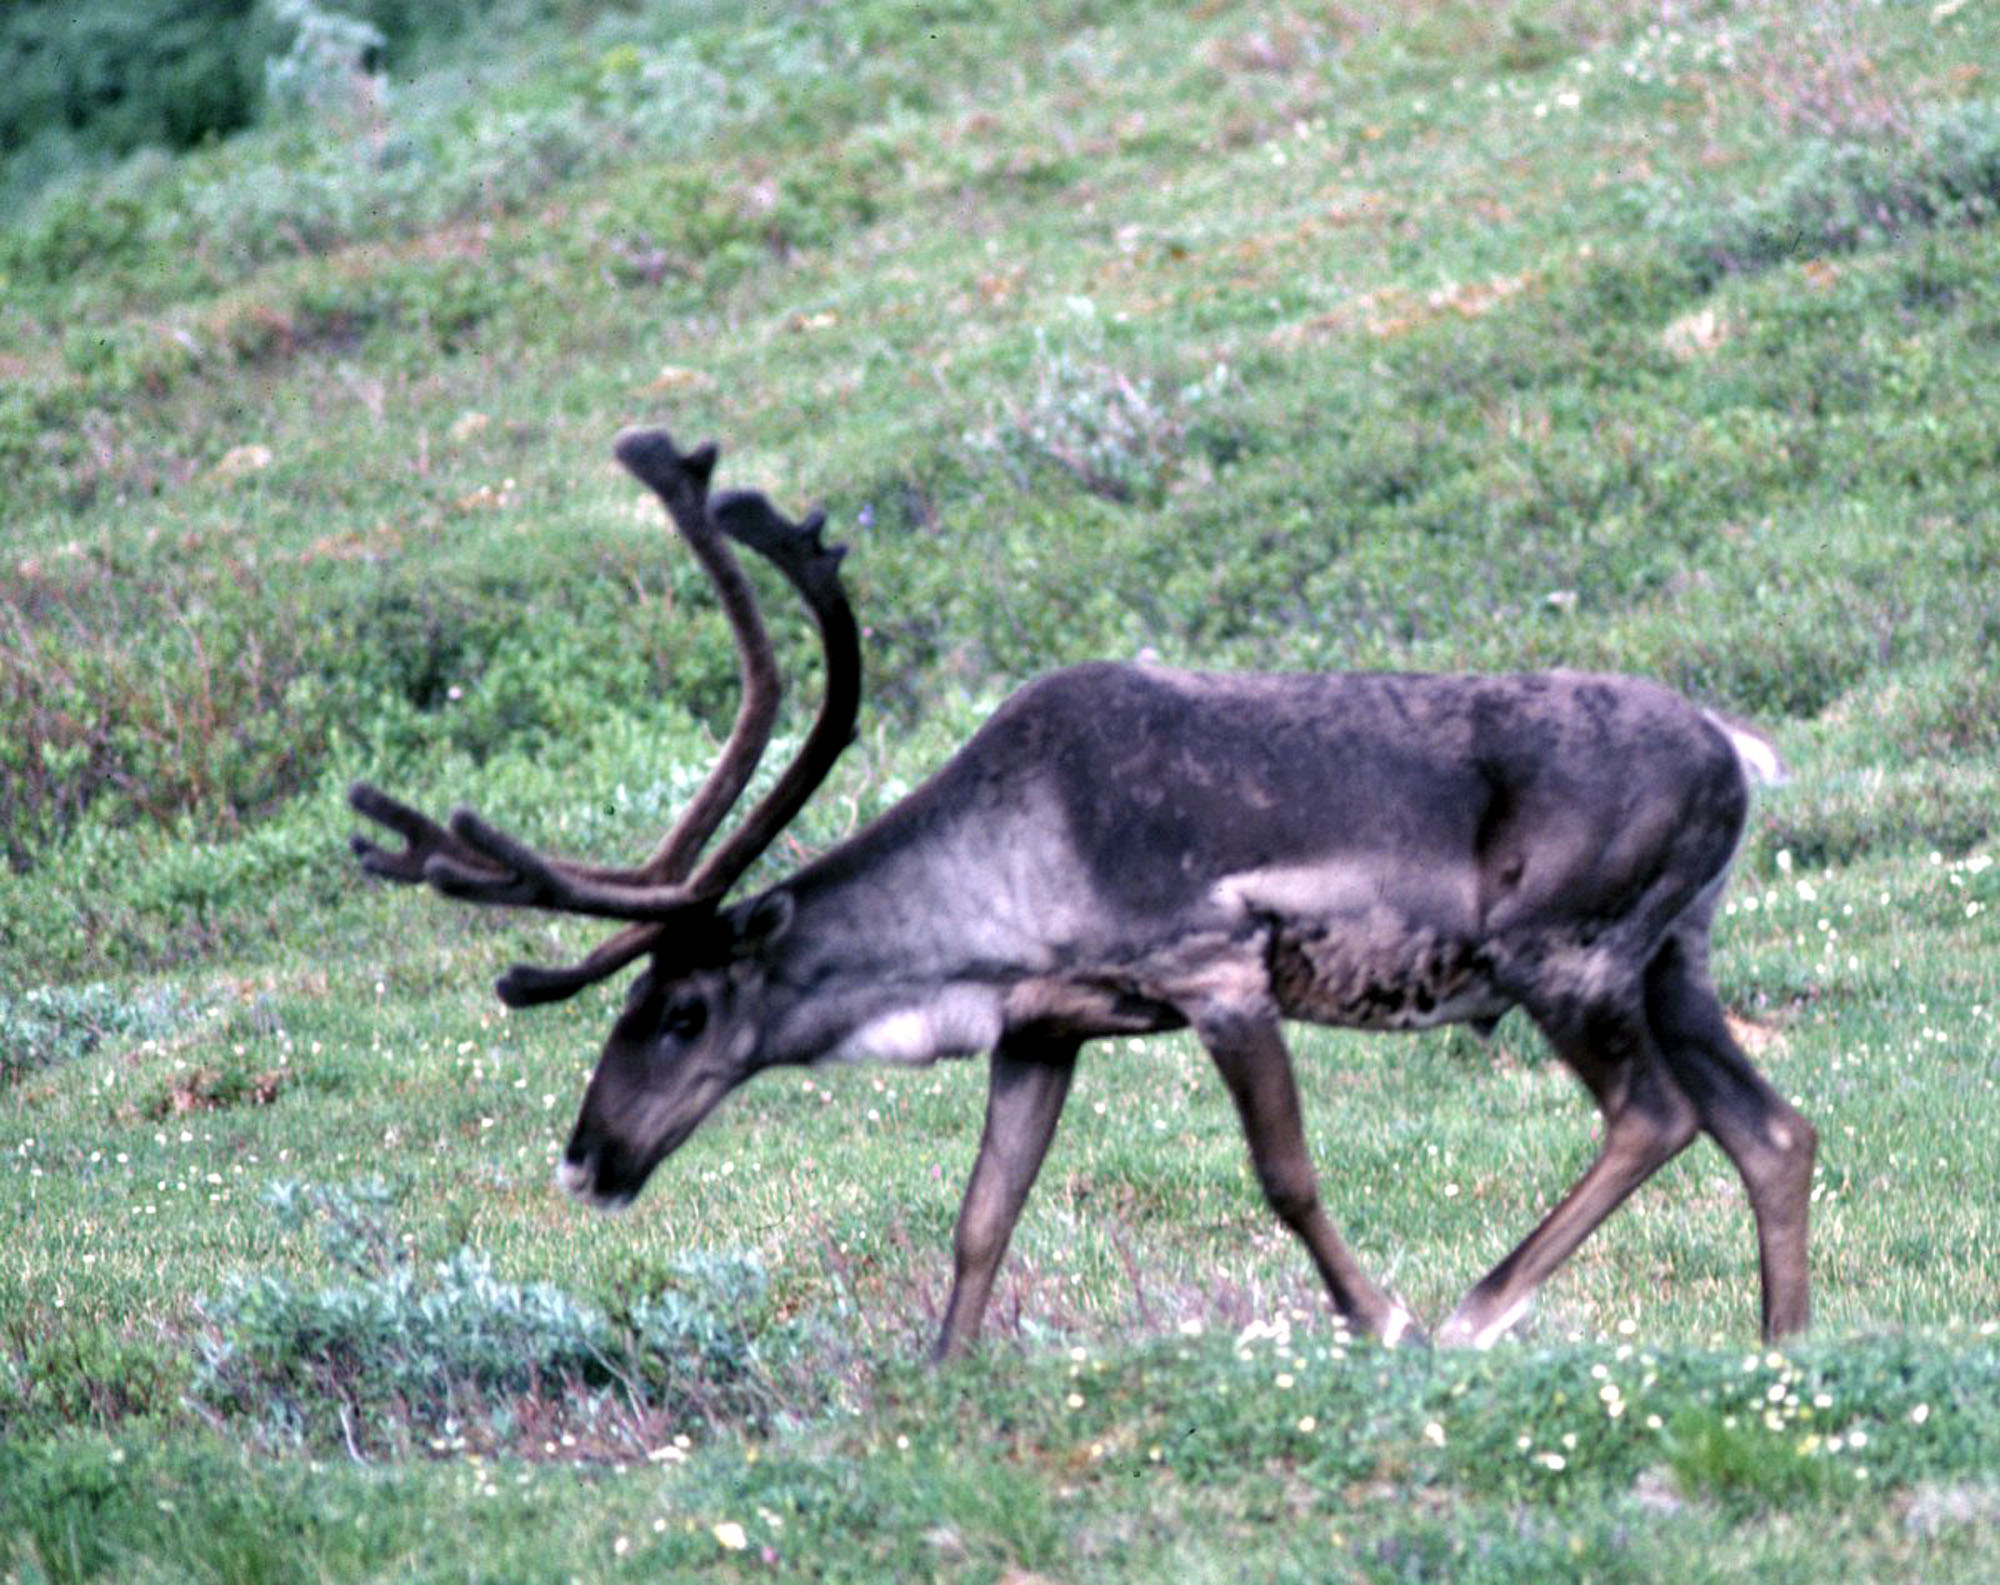 392886 05: This undated photo shows a bull caribou in the Arctic National Wildlife Refuge in Alaska. The Bush administration''s controversial plan to open the refuge to oil drilling was approved by the House of Representatives on August 2, 2001, but it faces a tough battle in the Democrat-controlled Senate. (Photo by US Fish and Wildlife Service/Getty Images)